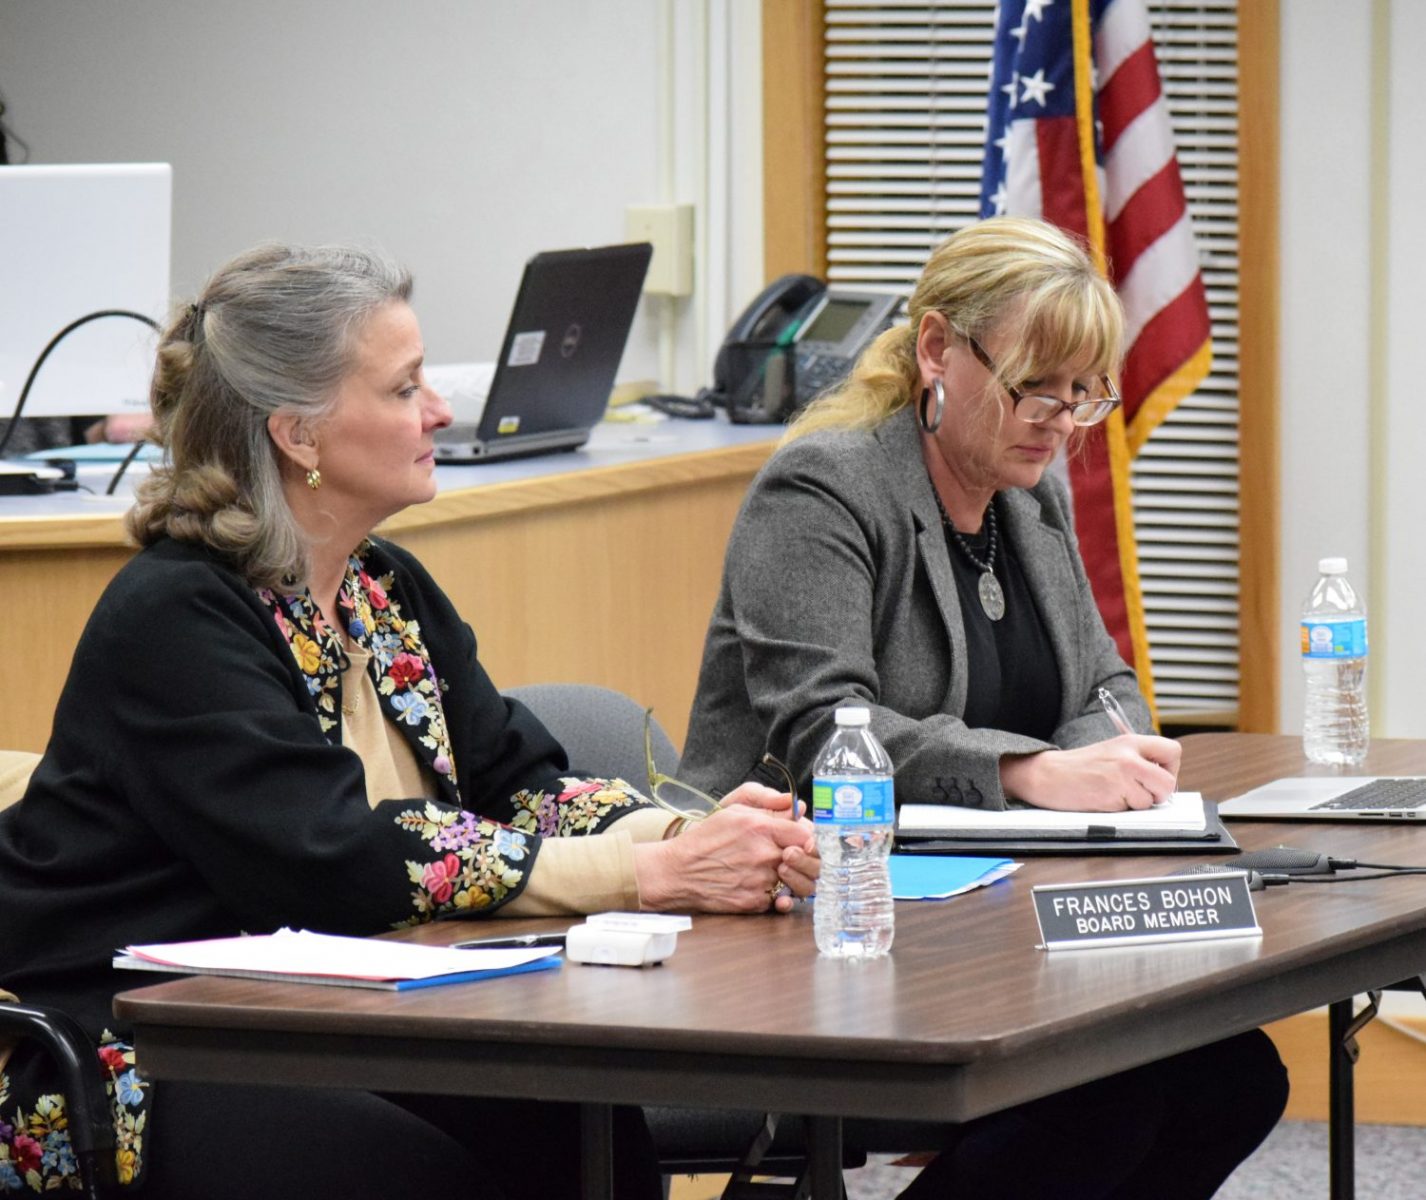 Cuts to the district’s operations would be significant if a referendum is not approved. The school board also faces the issue of how to fund potential athletic facility improvements. Shown are board members Frances Bohon, left, and Dorothy Chaney.